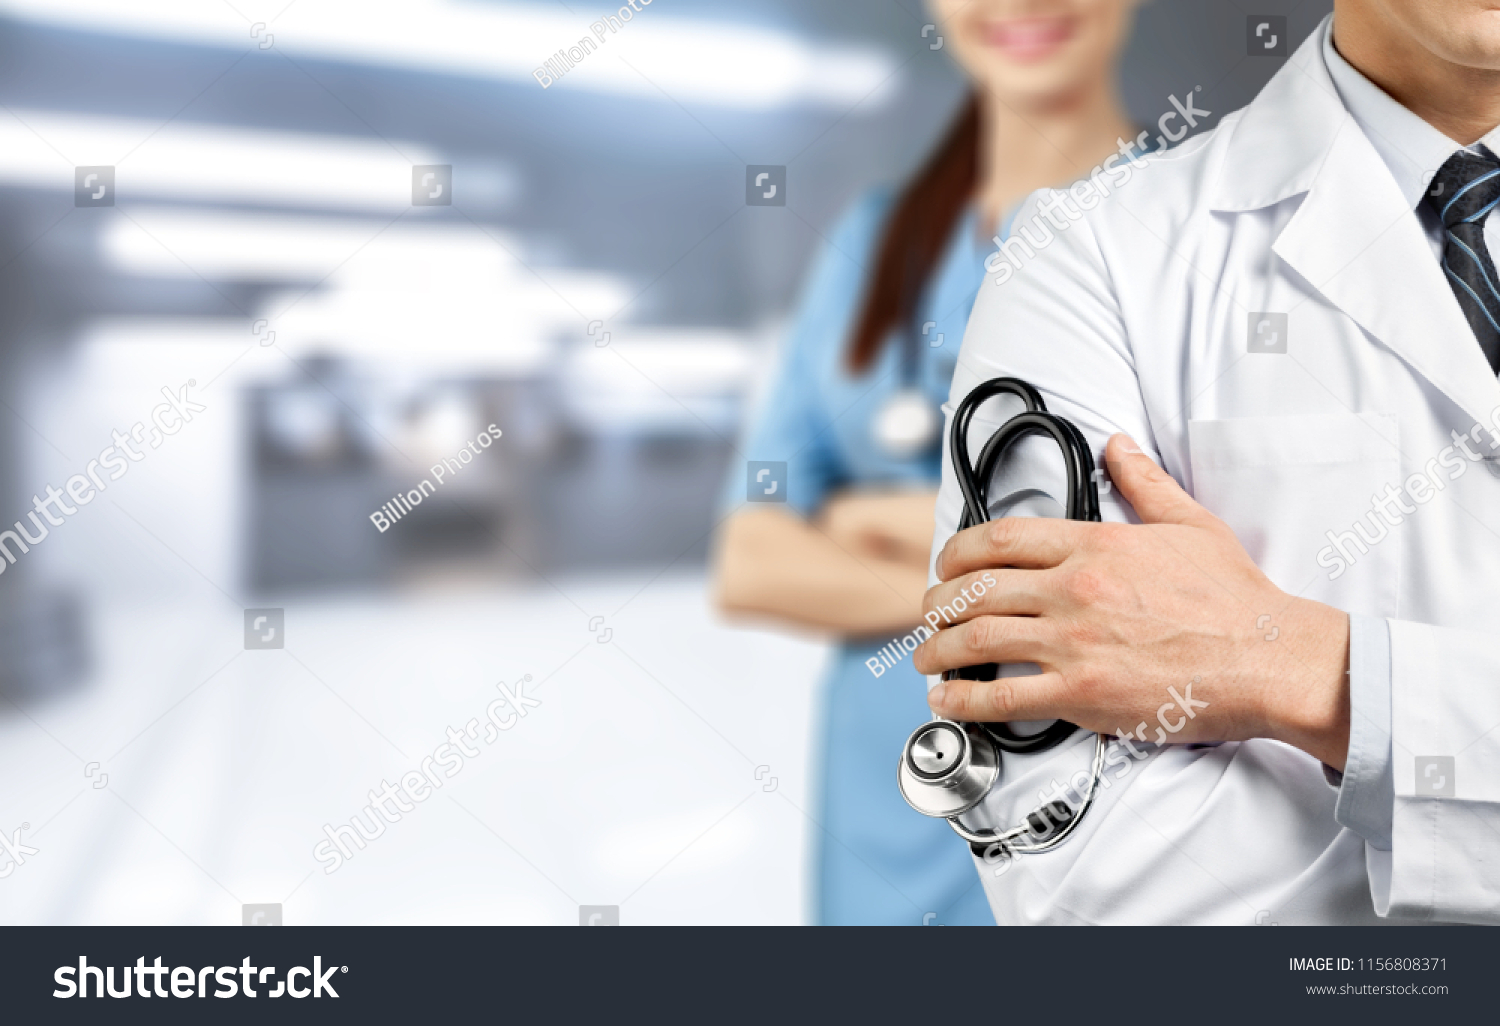 Doctor team with medical clinic background #1156808371